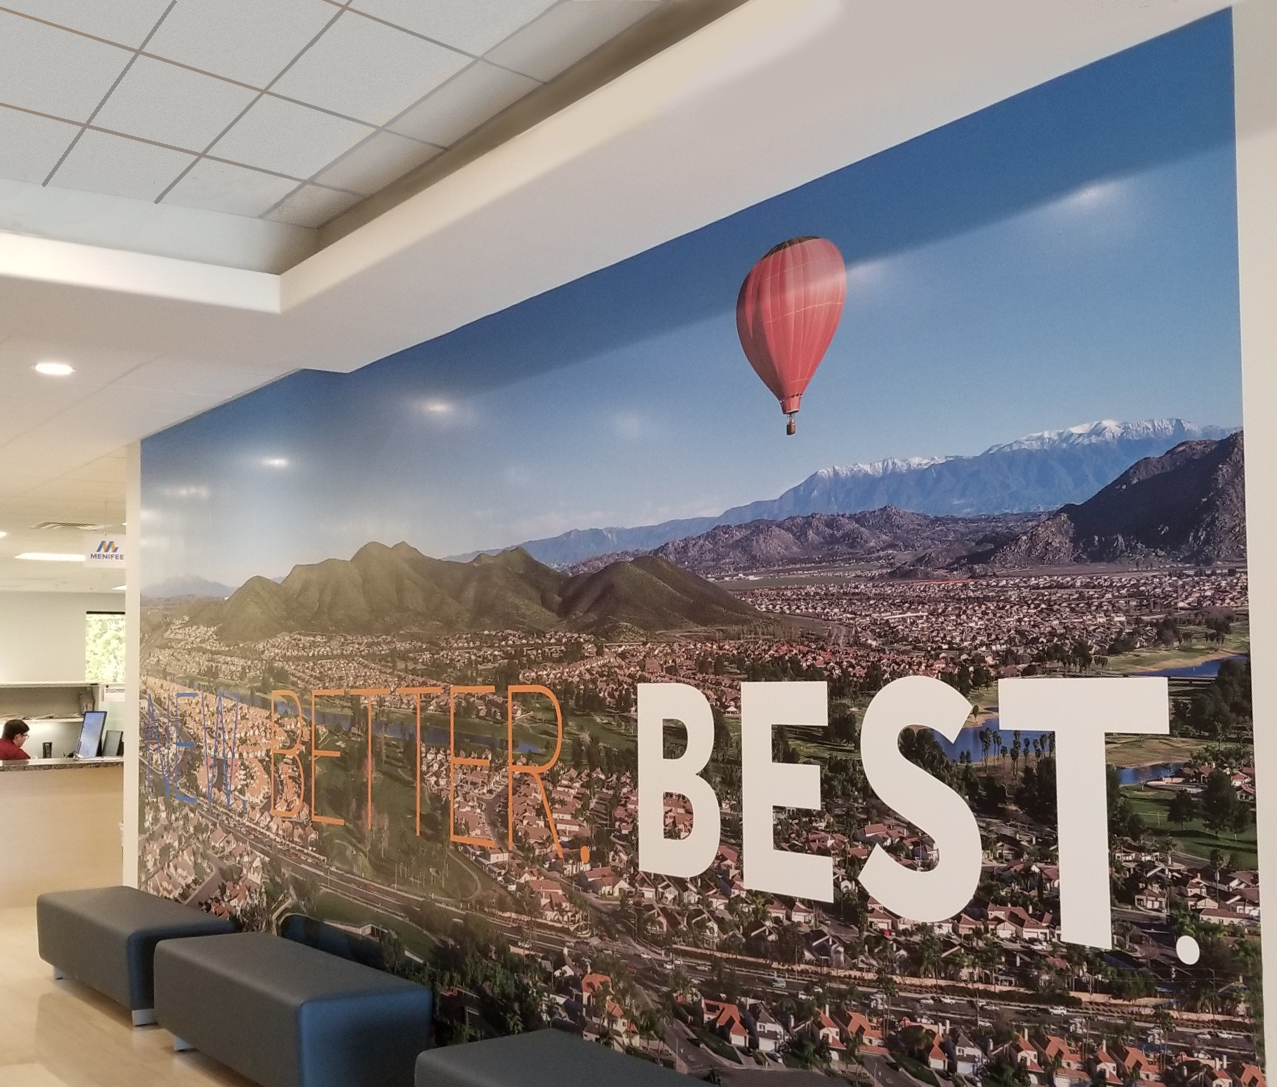 Wall Mural created for City of Menifee featyuring drone shot and hot air balloon